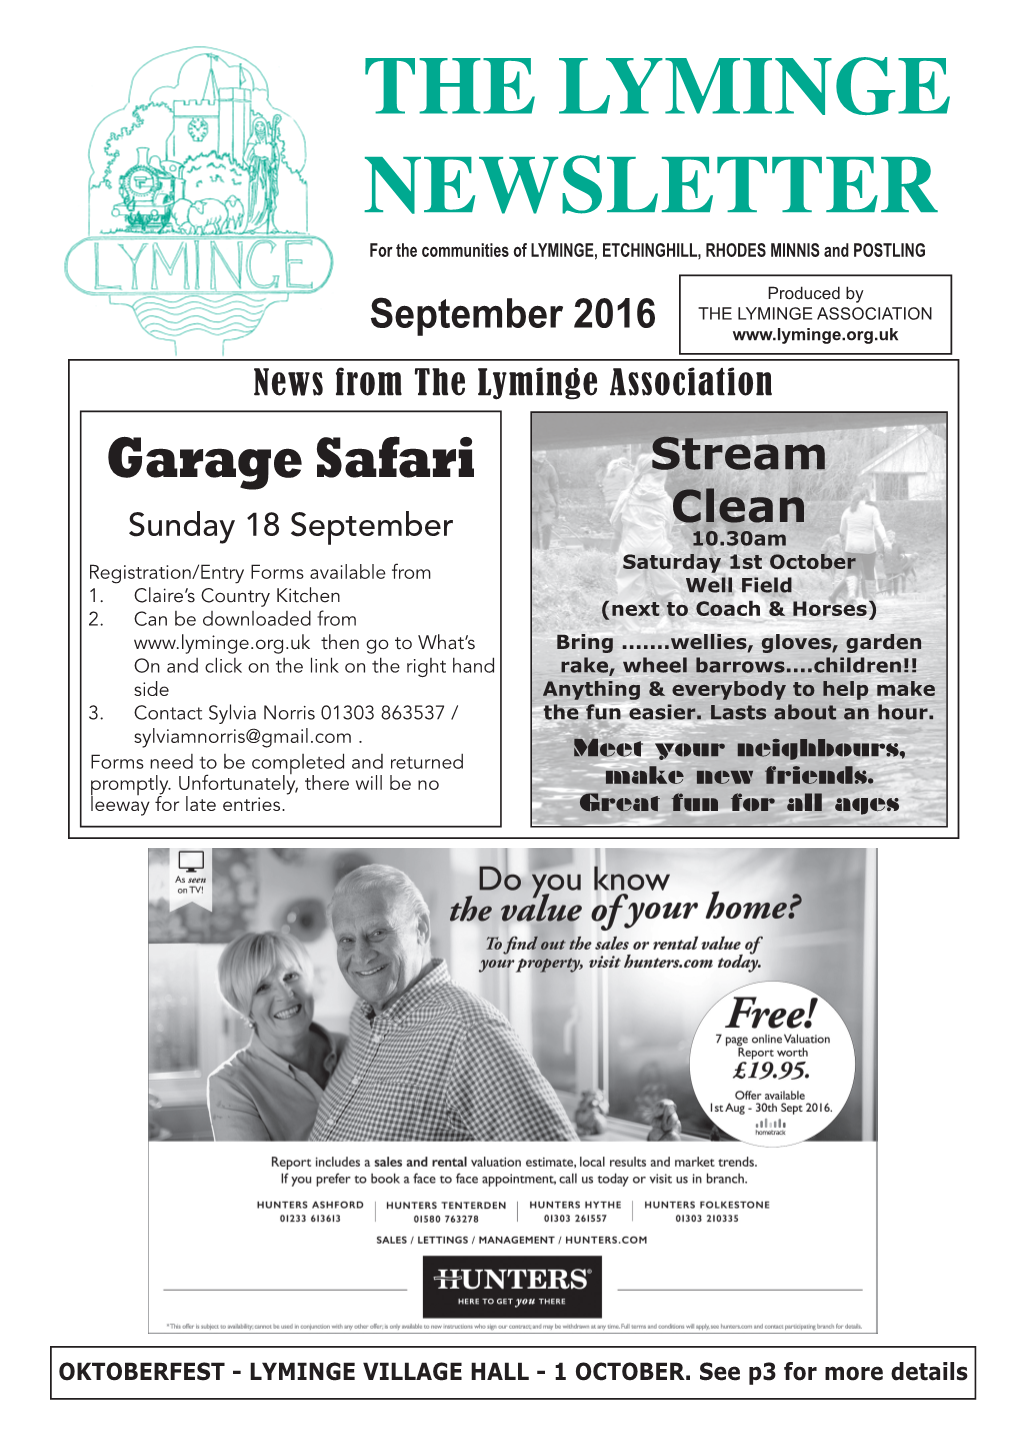 THE LYMINGE NEWSLETTER for the Communities of LYMINGE, ETCHINGHILL, RHODES MINNIS and POSTLING